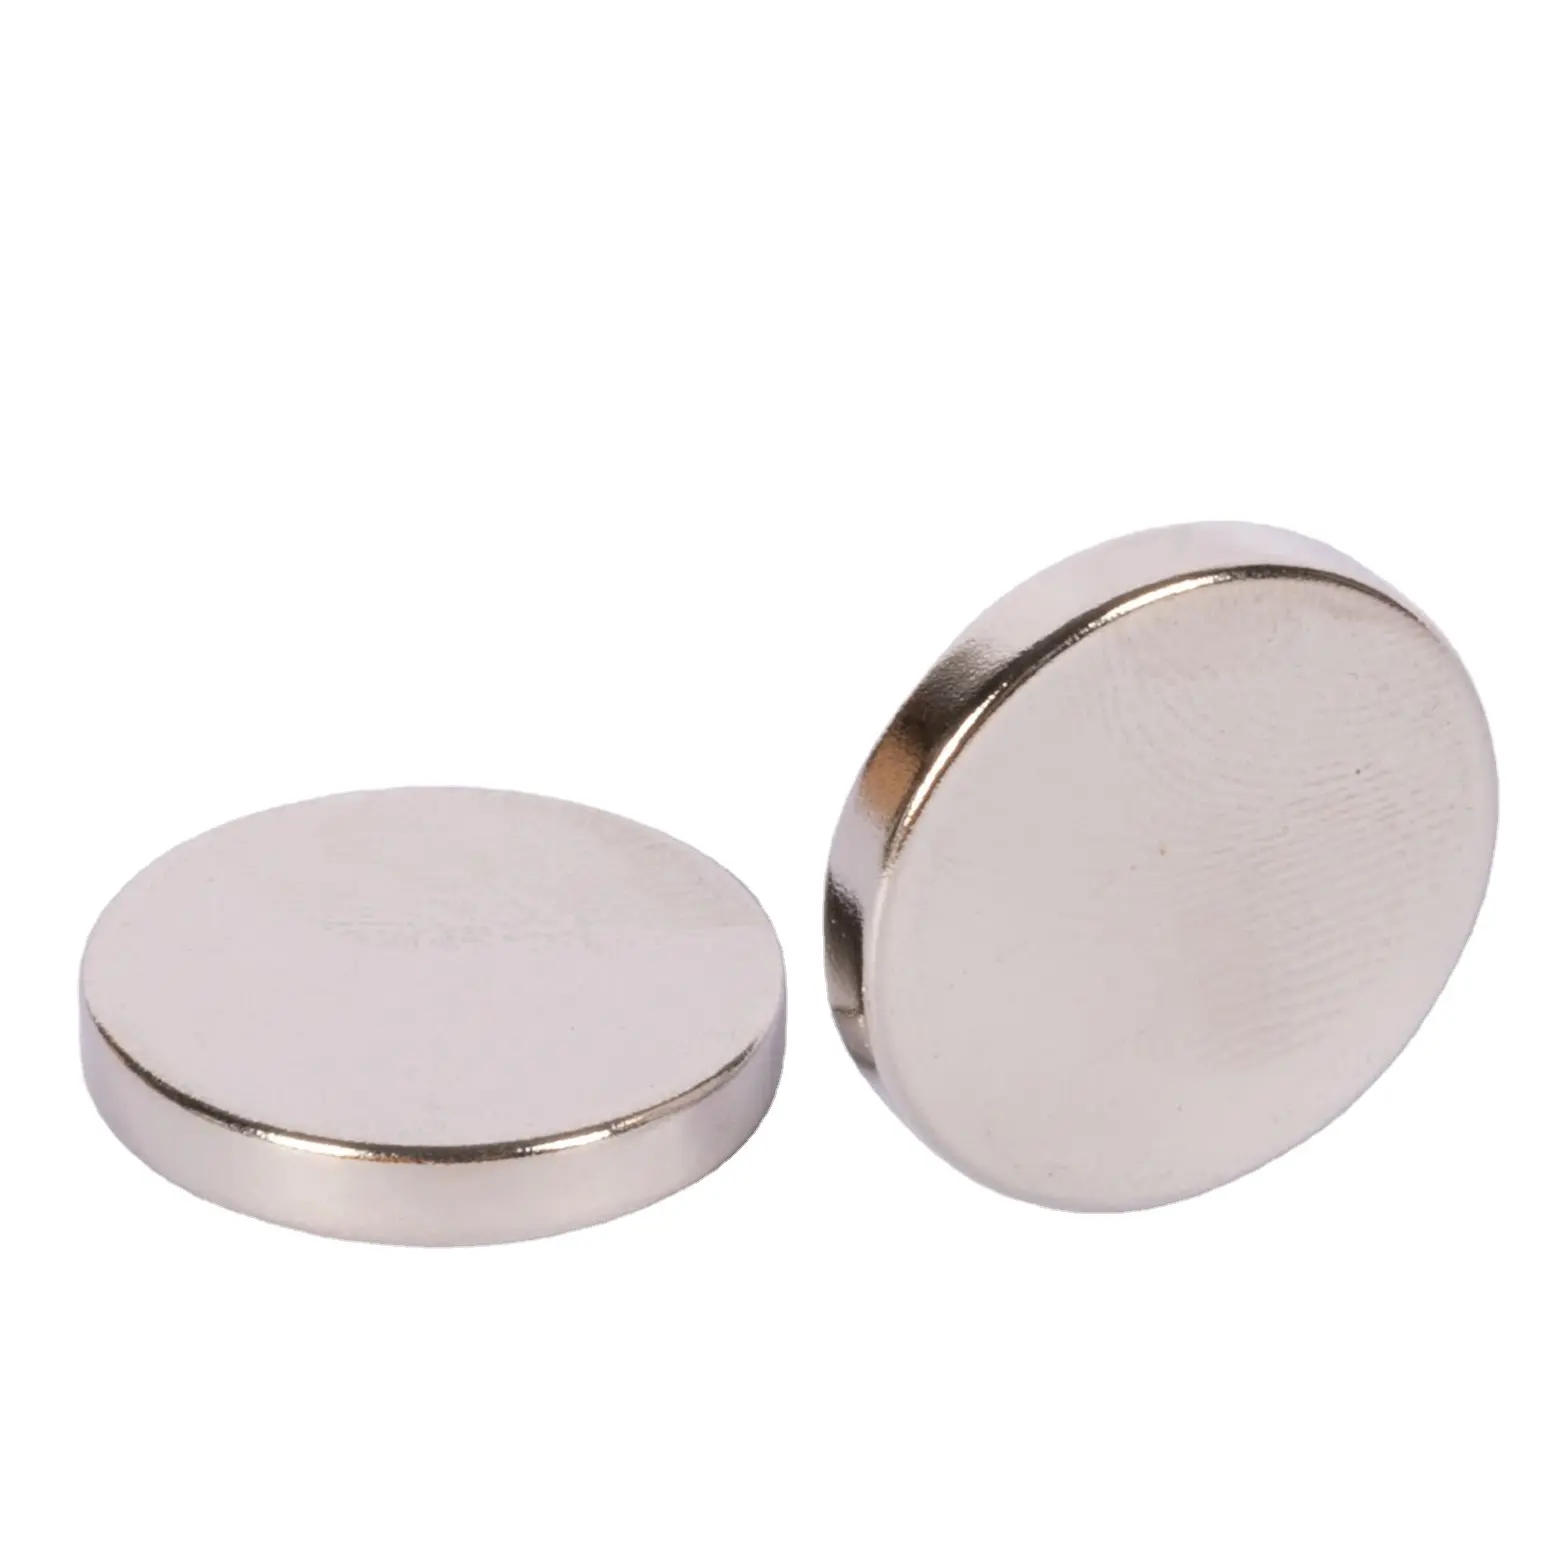 strong neodymium disc magnets